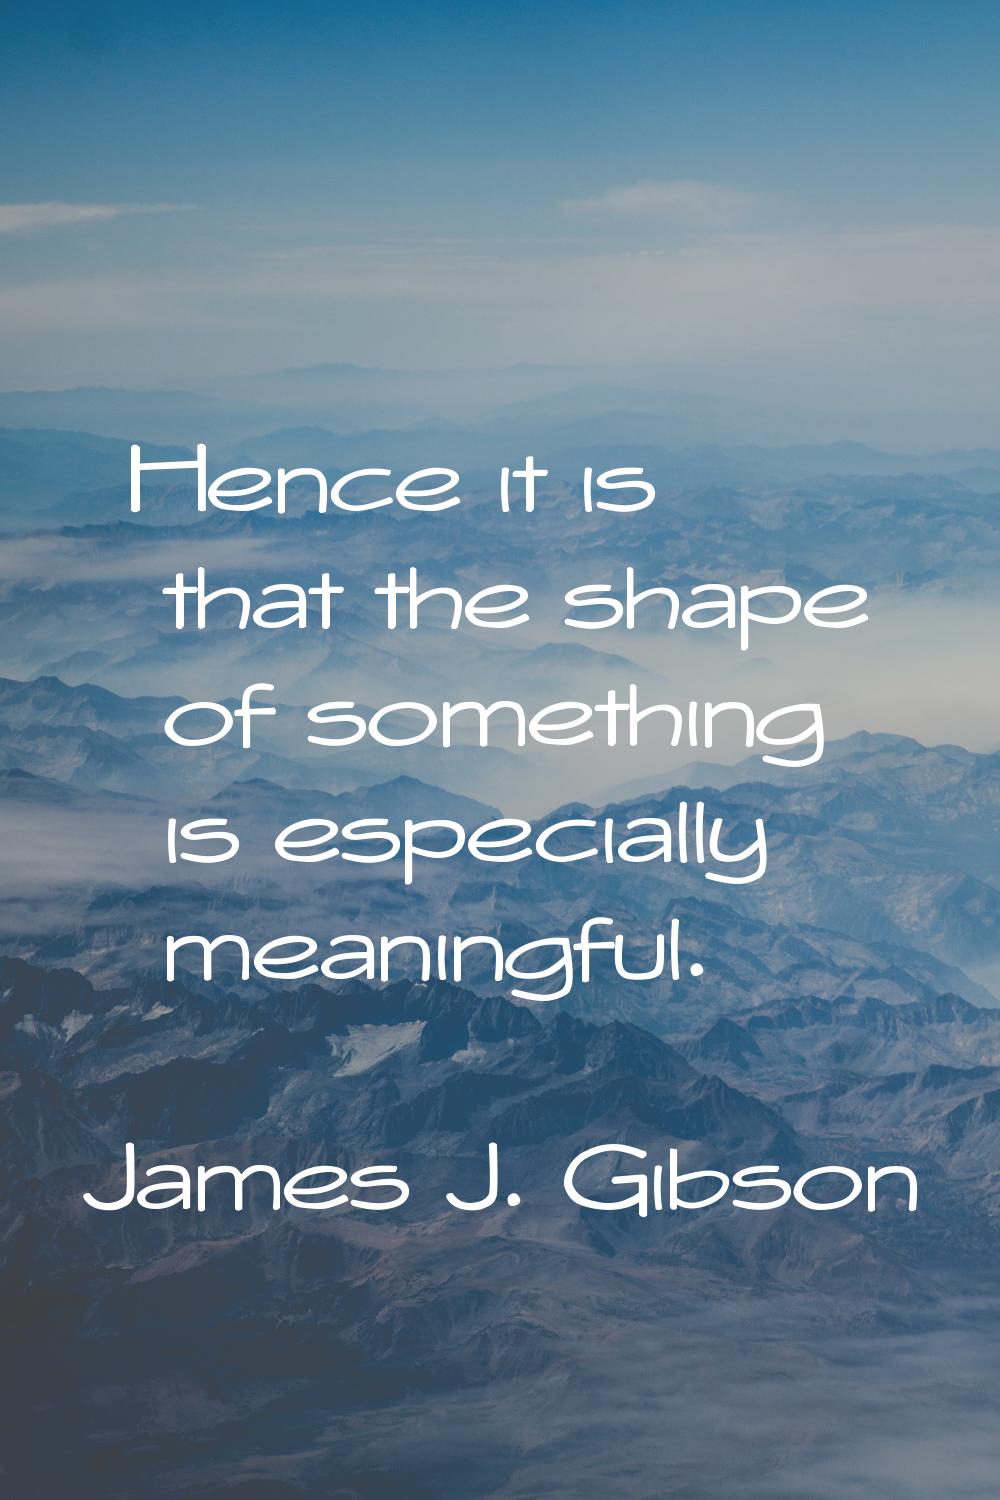 Hence it is that the shape of something is especially meaningful.